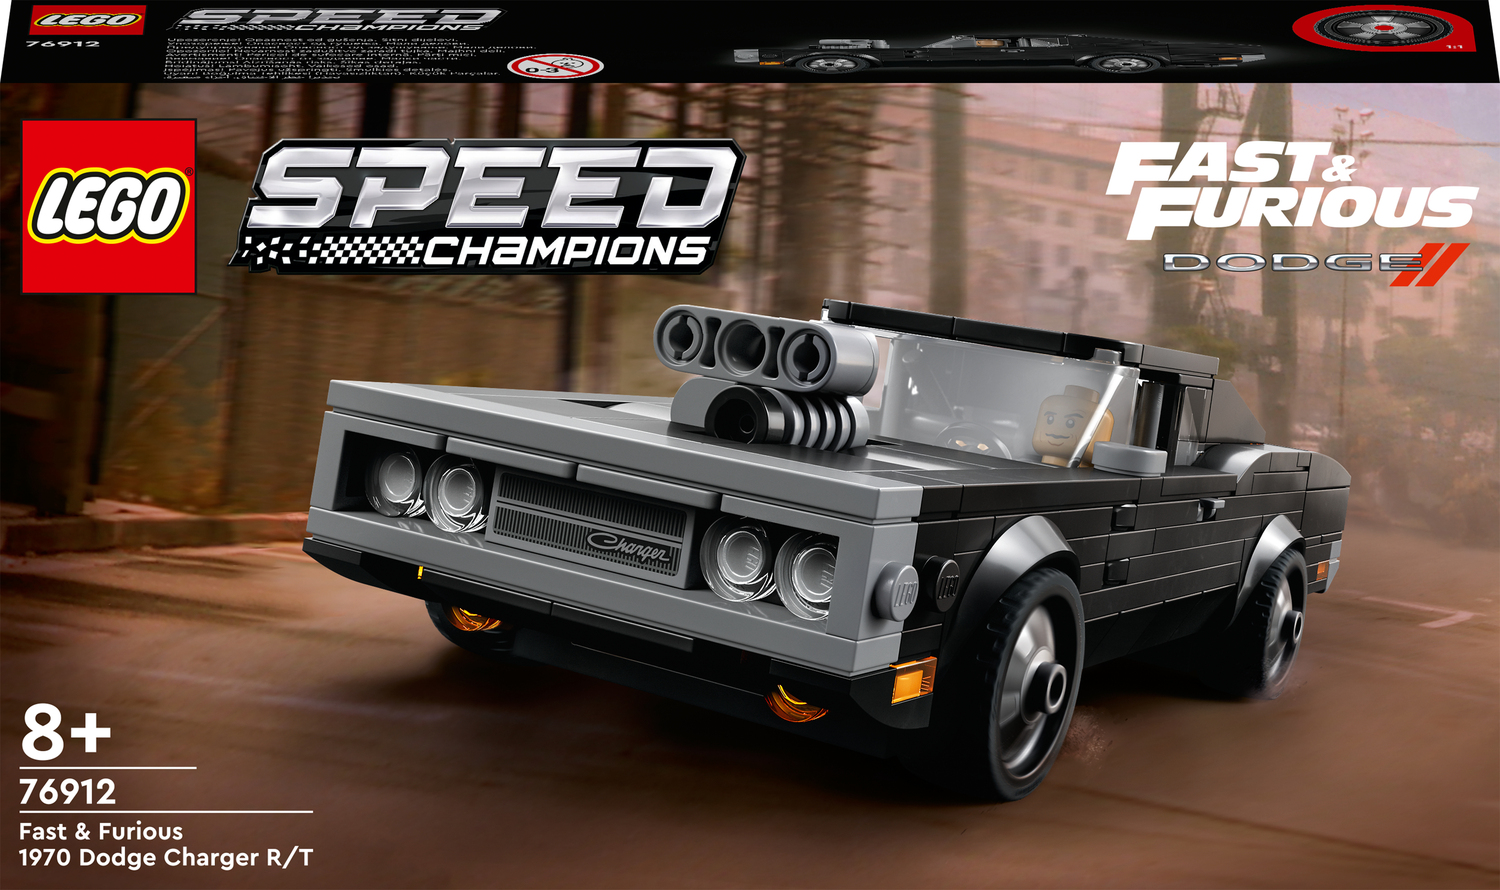 Lego Speed Champions OVP Fast and Furious Set